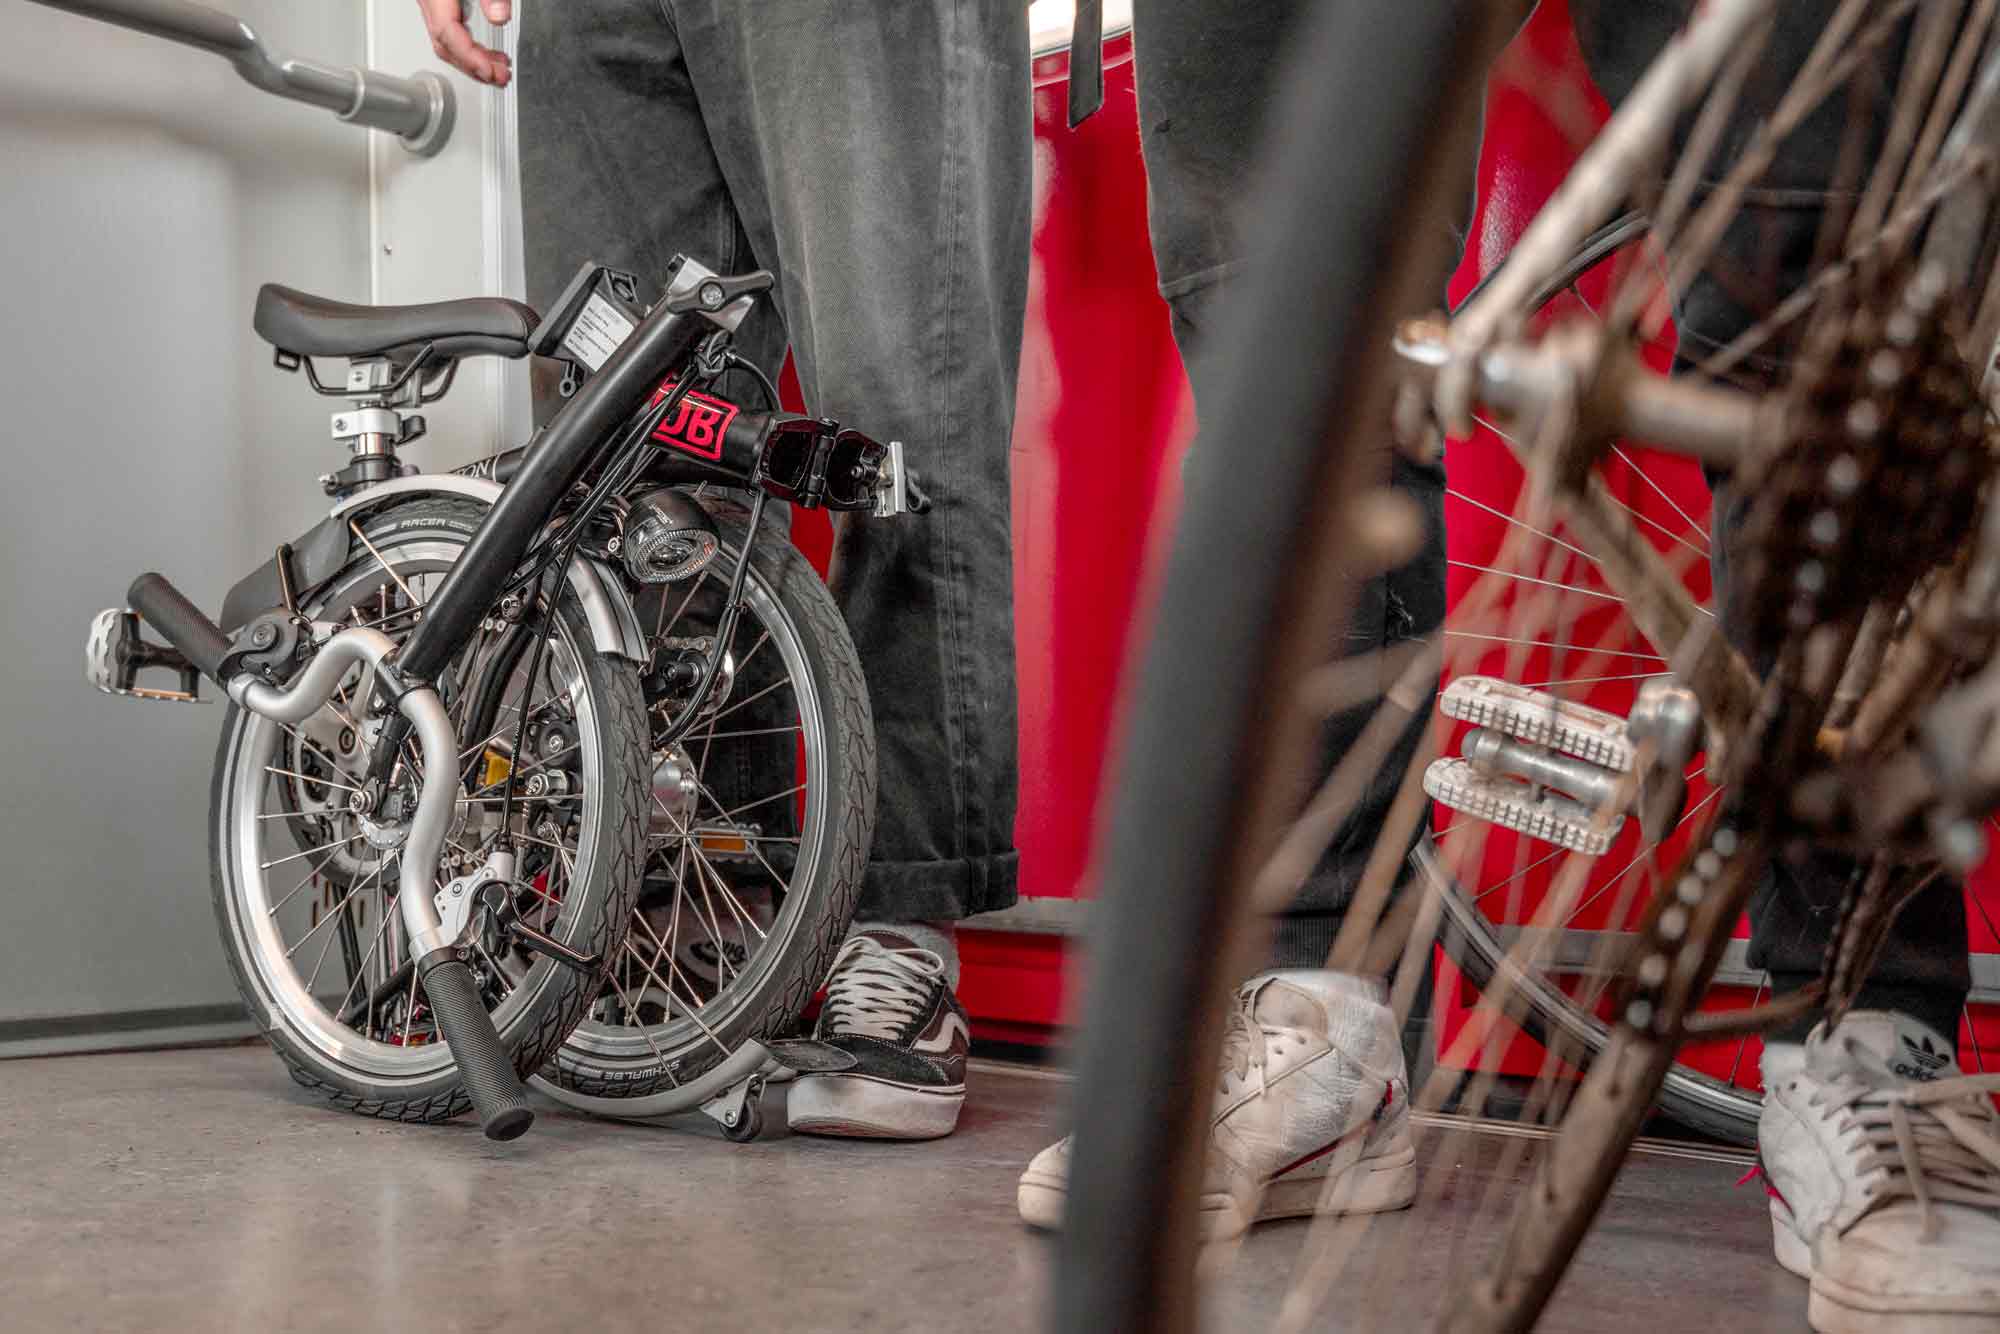 No more space problems on the train! The folding bike subscription makes it possible.